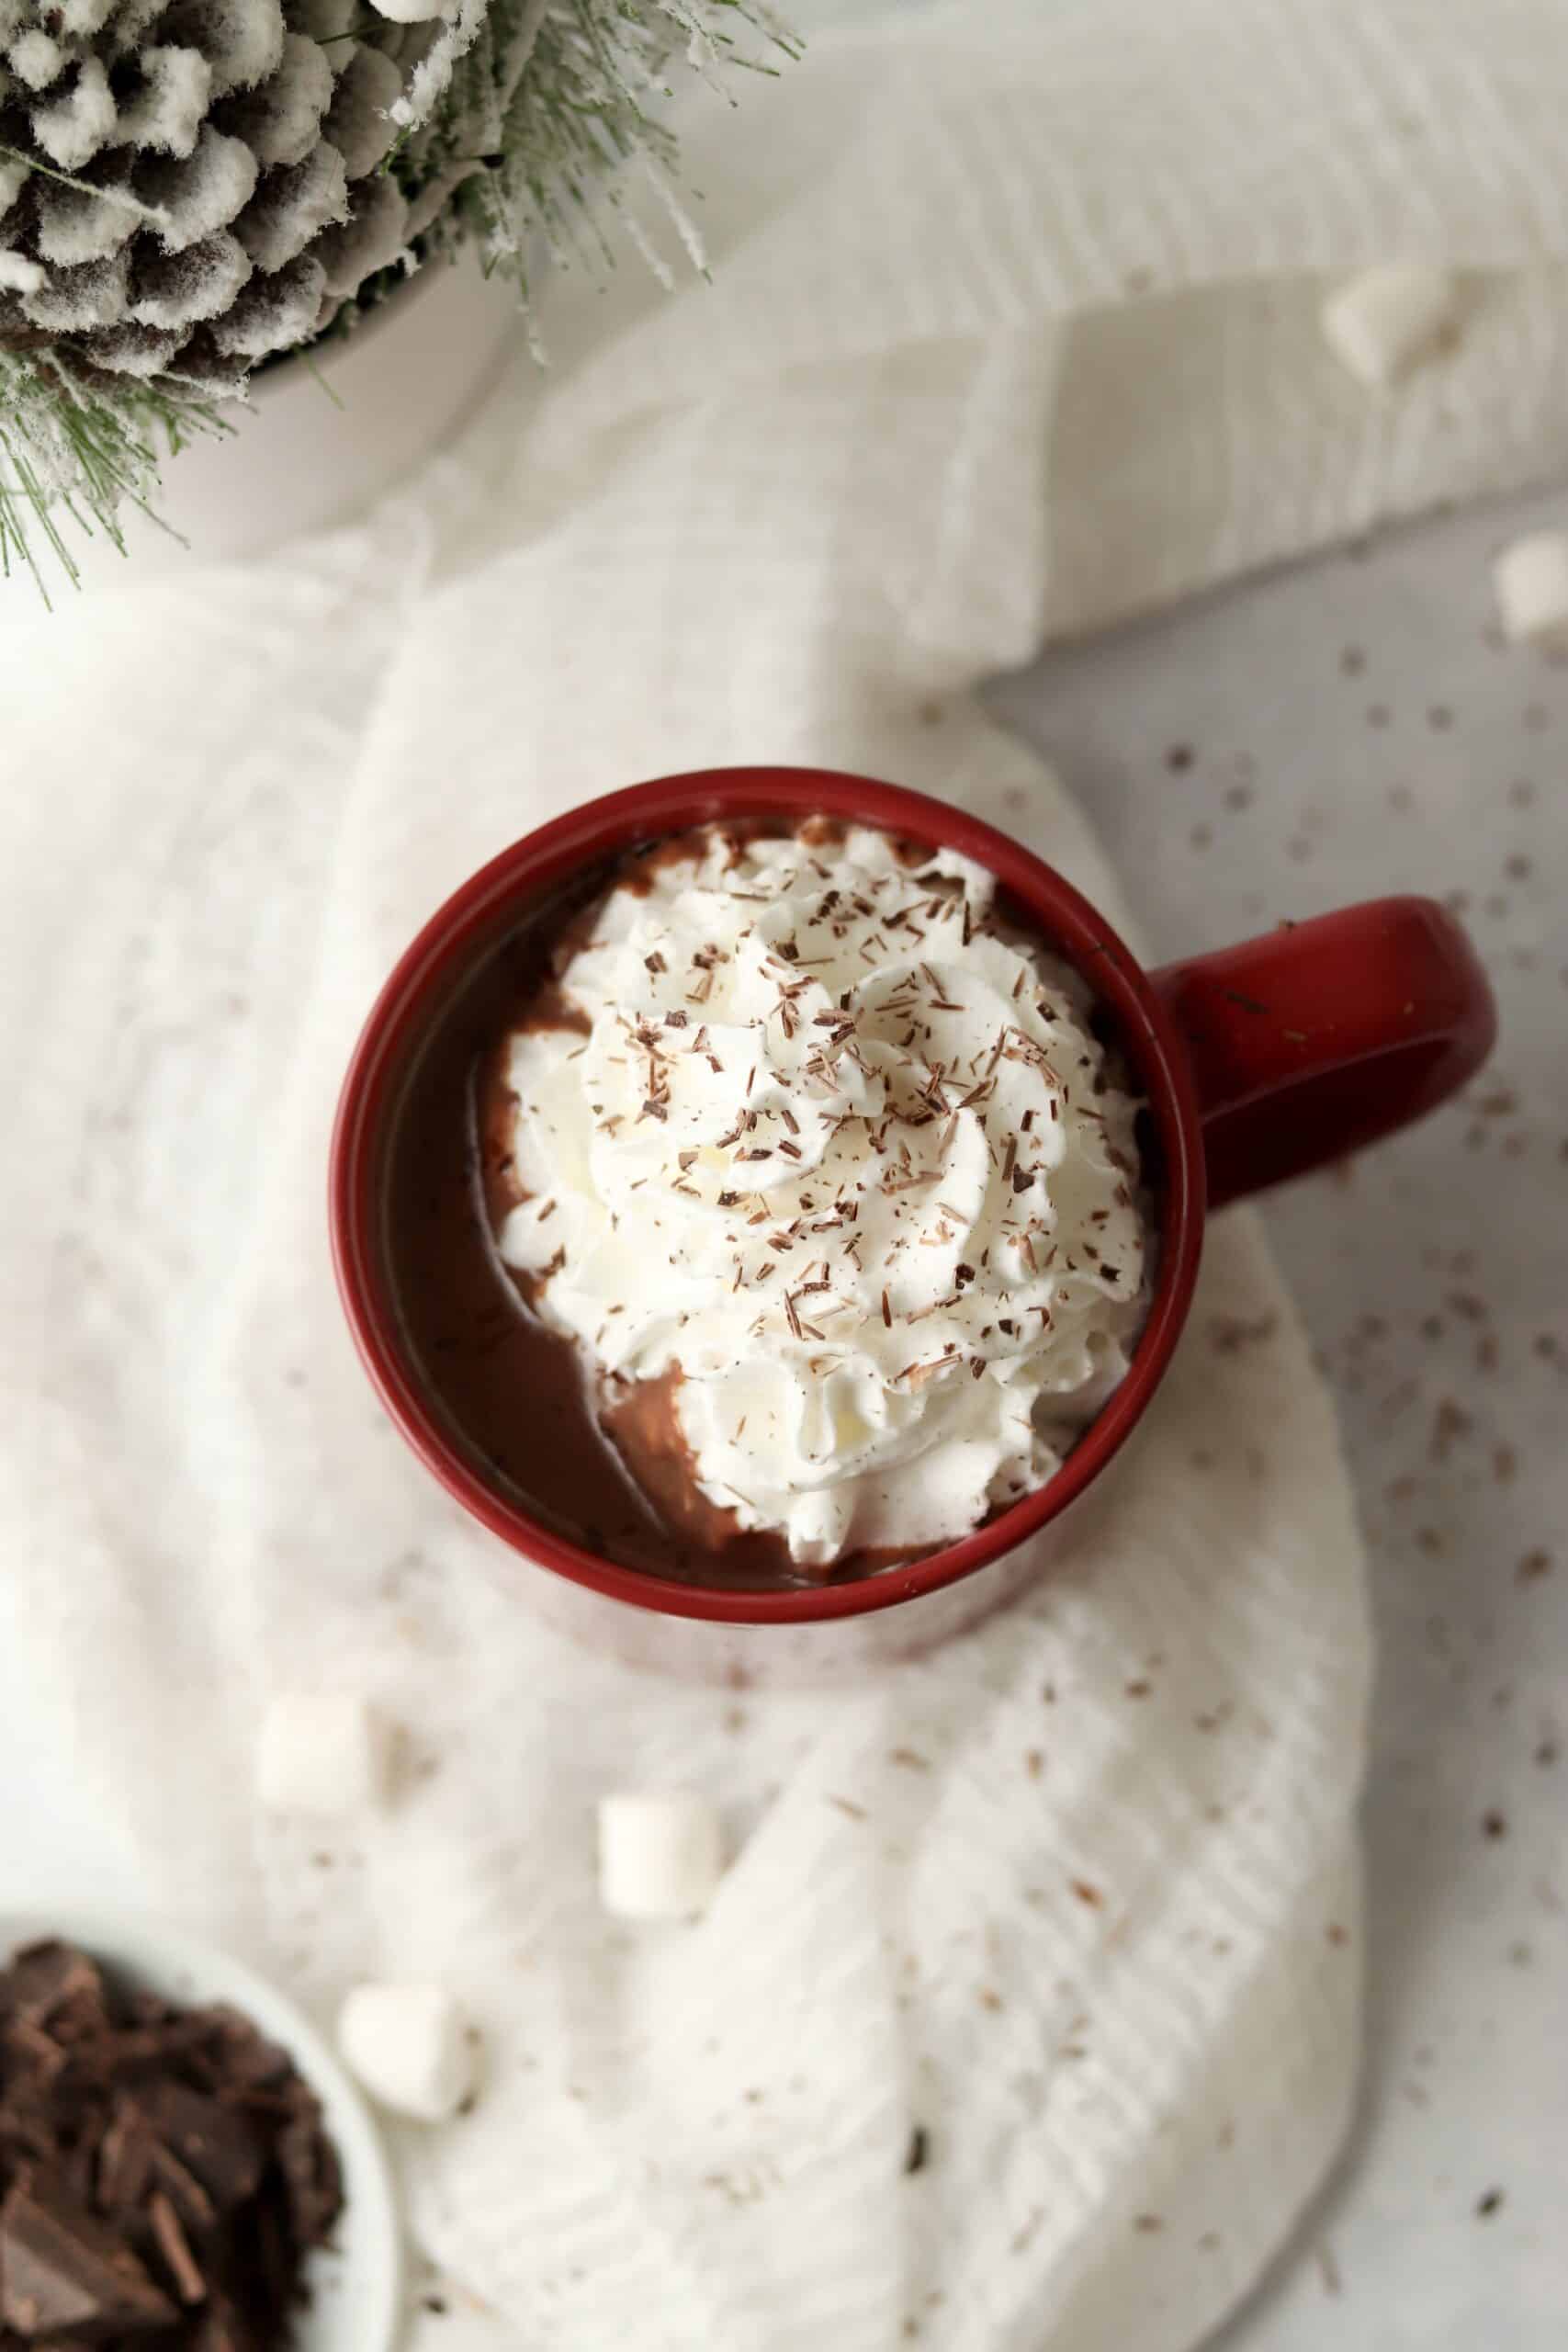 hot chocolate with whipped cream and chocolate shavings in a mug